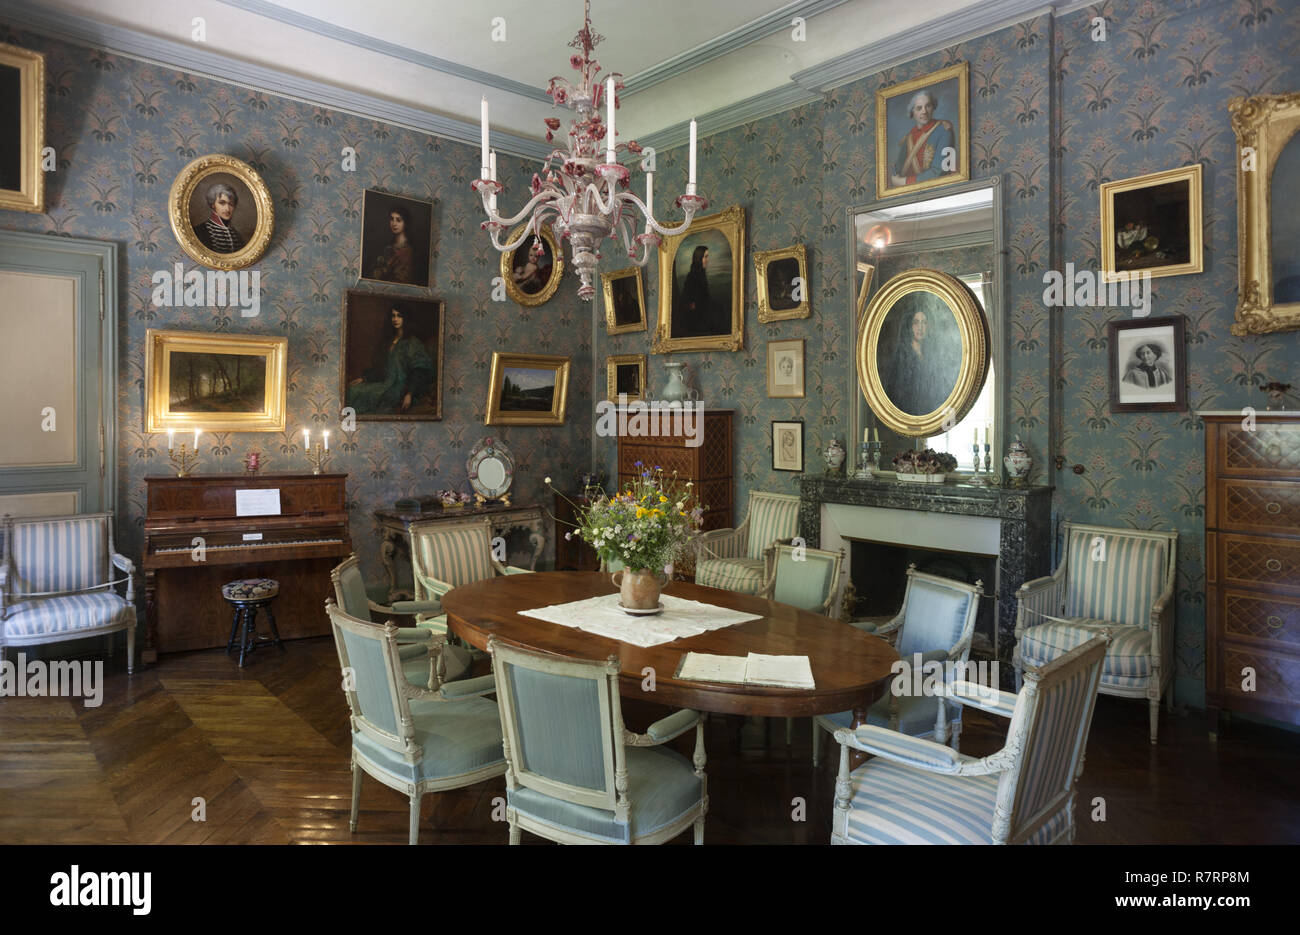 Nohant-Vic, the castle of George Sand (Le château de George Sand). Interior. A drawing room. Salon Stock Photo